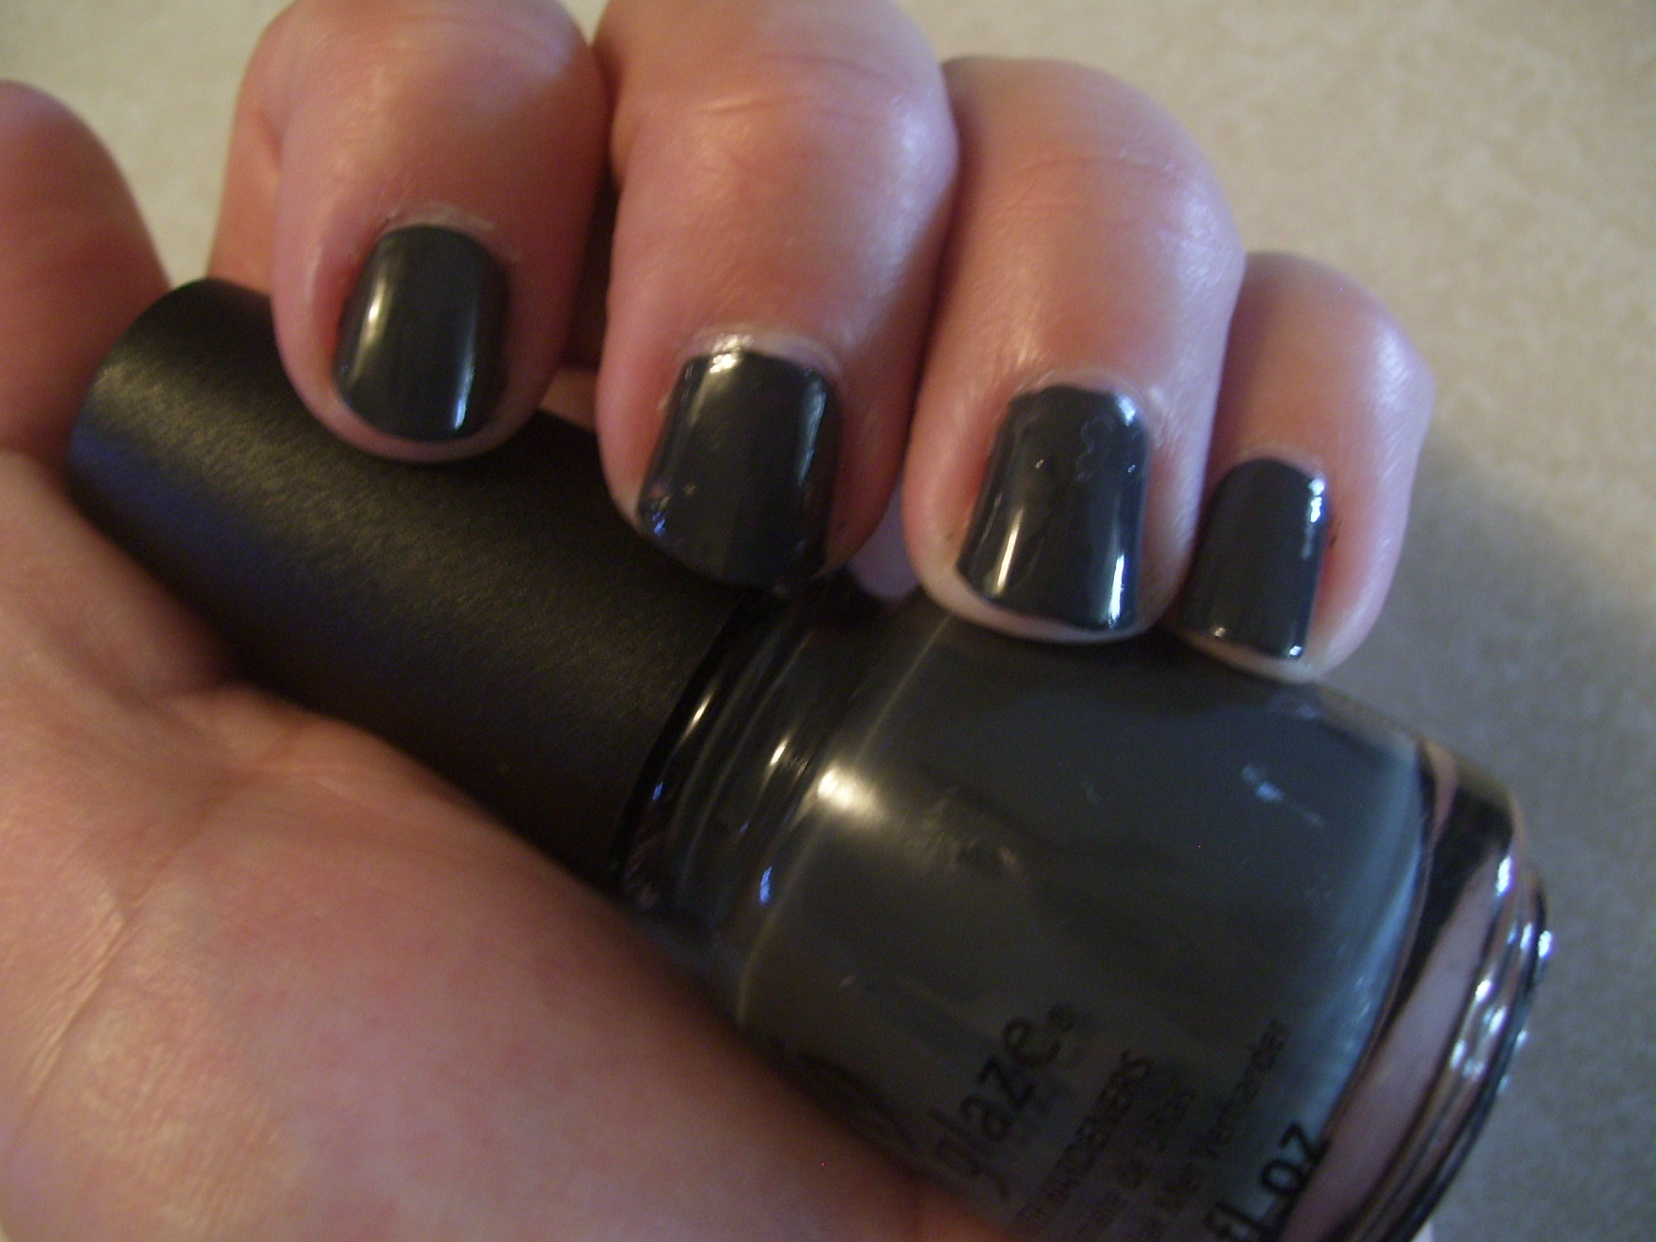 Swatch & Review: China Glaze Metro Collection:  Concrete Catwalk